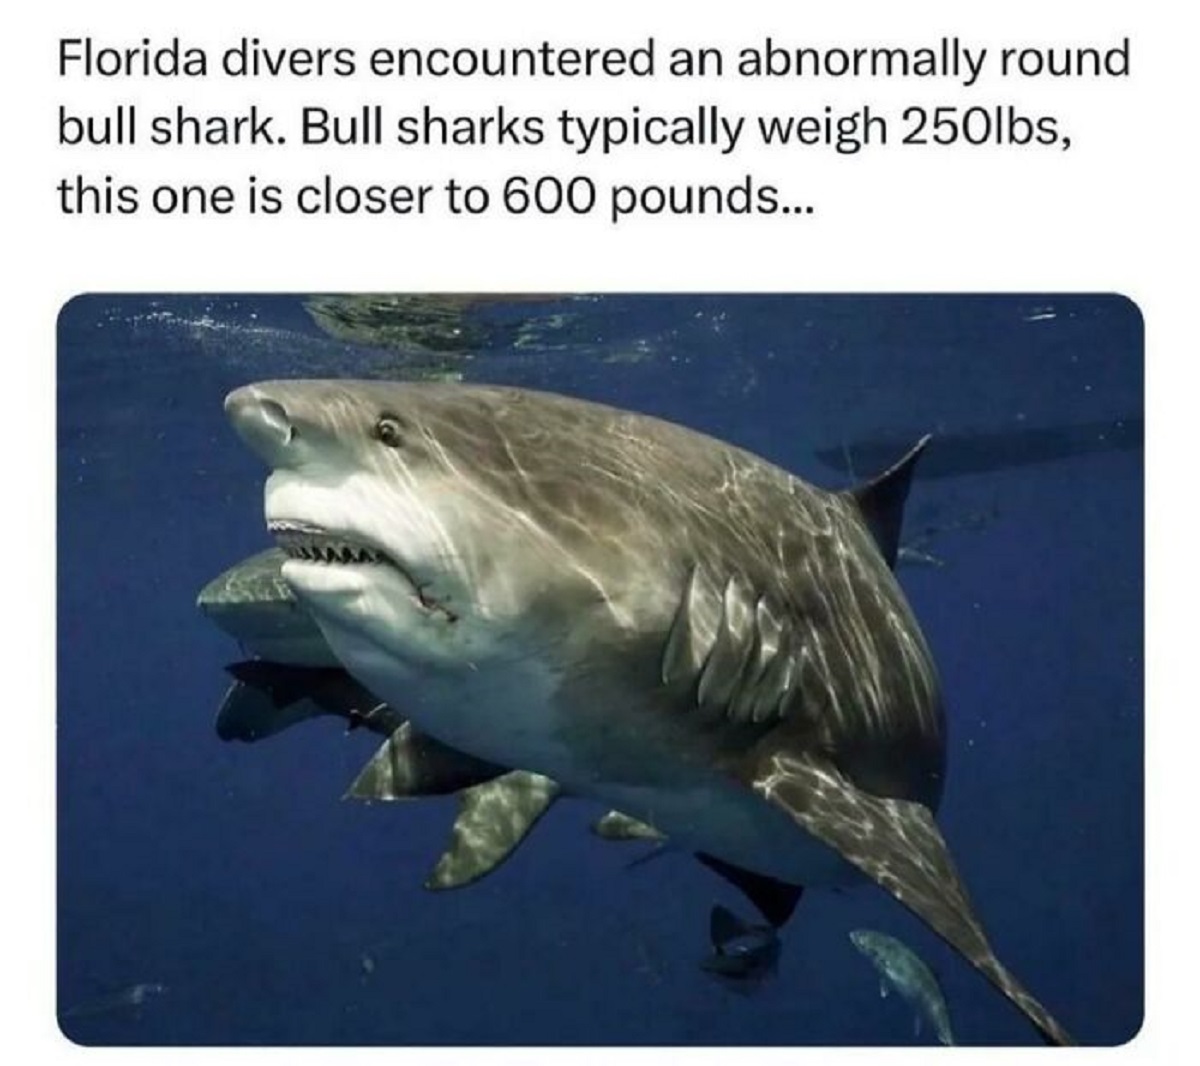 abnormally round bull shark - Florida divers encountered an abnormally round bull shark. Bull sharks typically weigh 250lbs, this one is closer to 600 pounds...